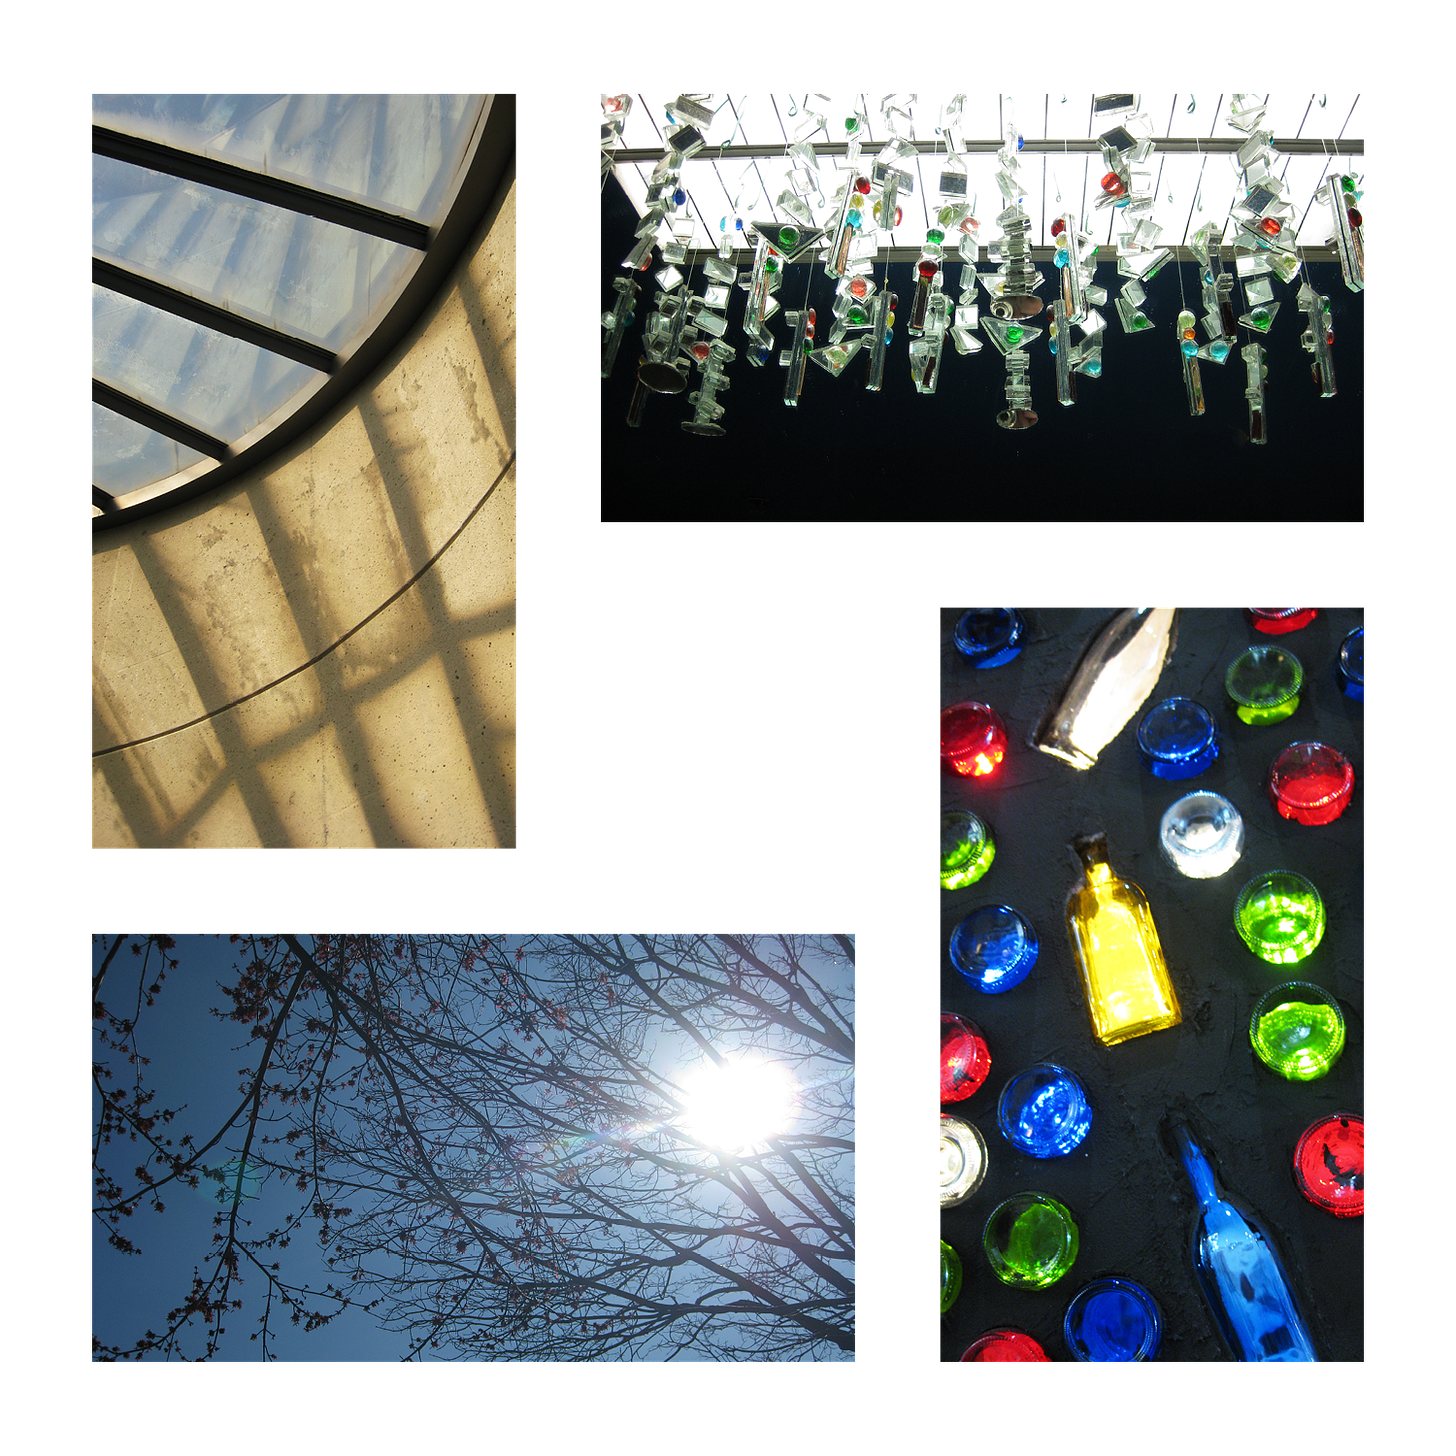 A compilation of four images taken with nat’s digicam. Clockwise from top left: a warm-toned photograph of the ceiling windows and concrete at the American Visionary Arts Museum; mirrored lightcatchers hang from the bathroom lights at AVAM; a wall of glass bottles creating a stain glass effect; the sun peeks through bare trees against a blue sky.